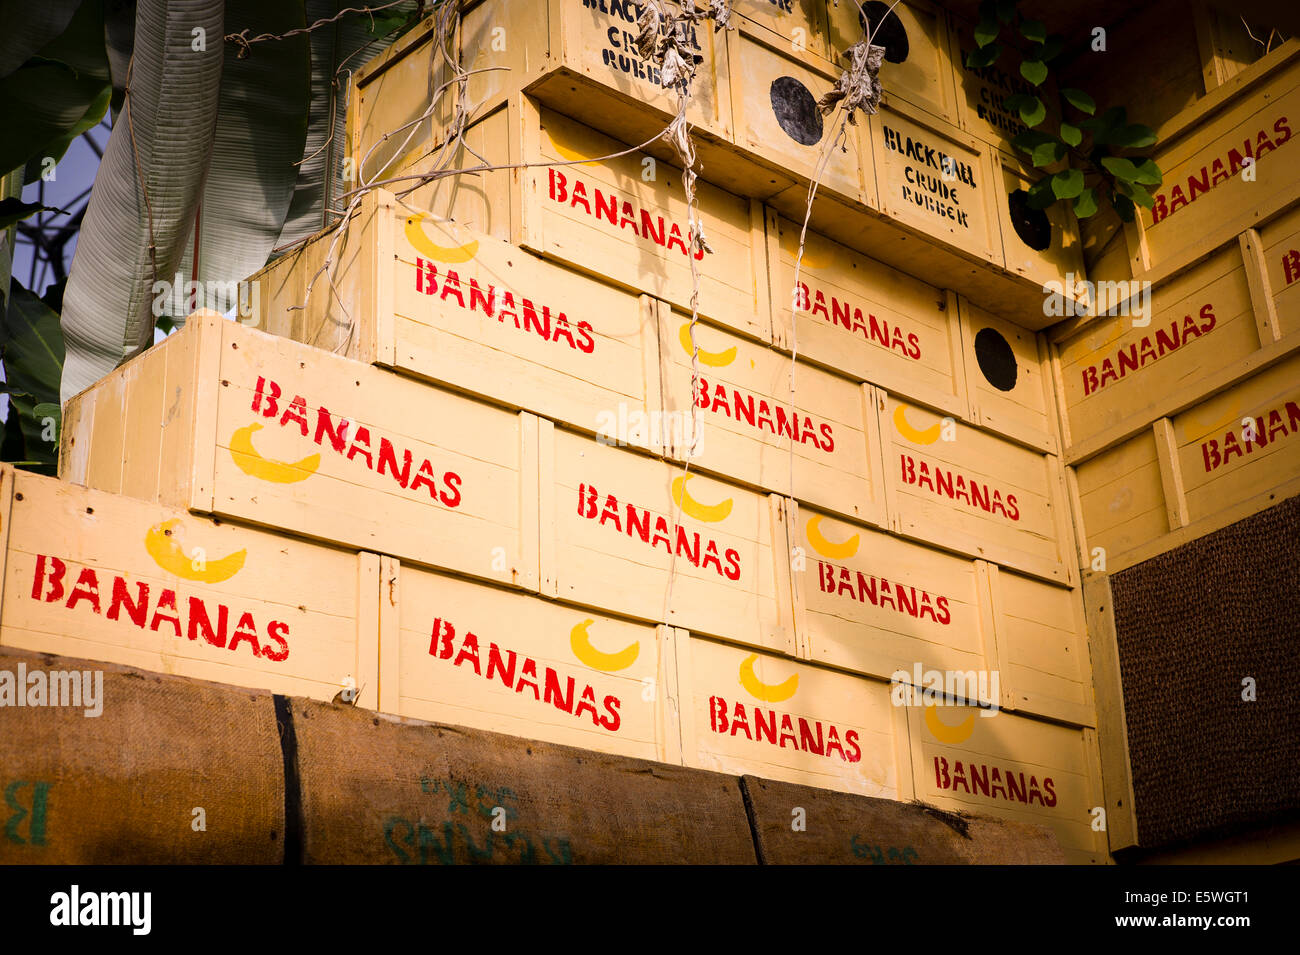 Banana boxes stacked to illustrate economic value of plants in Eden Project UK Stock Photo